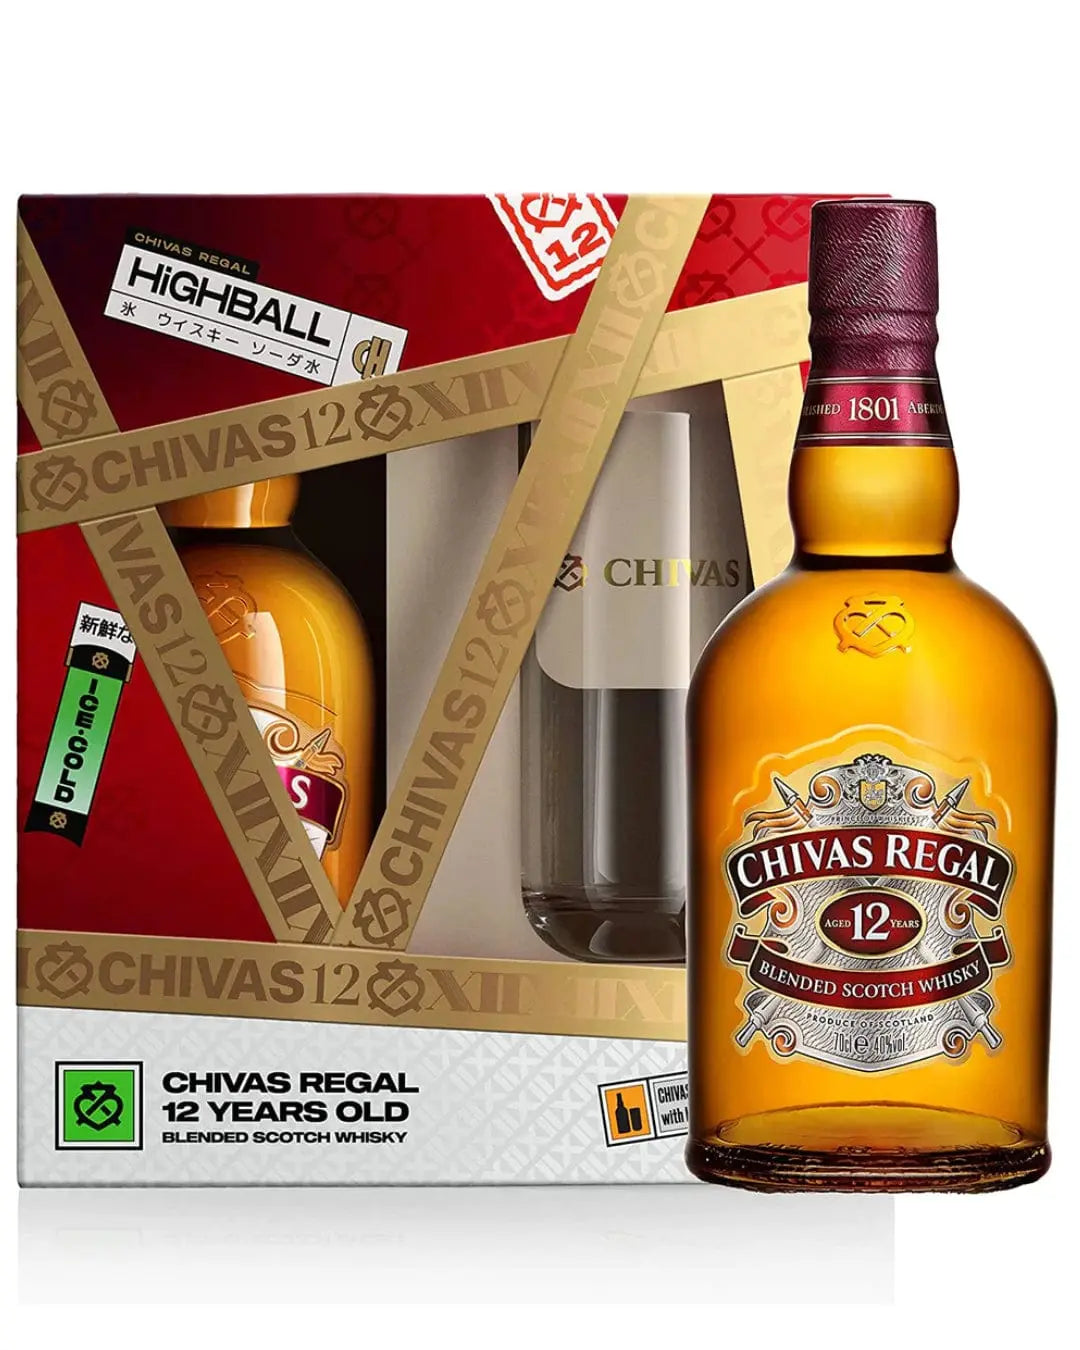 Chivas Regal 12 Year Old Highball Glasses Gift Set, 70 cl Whisky